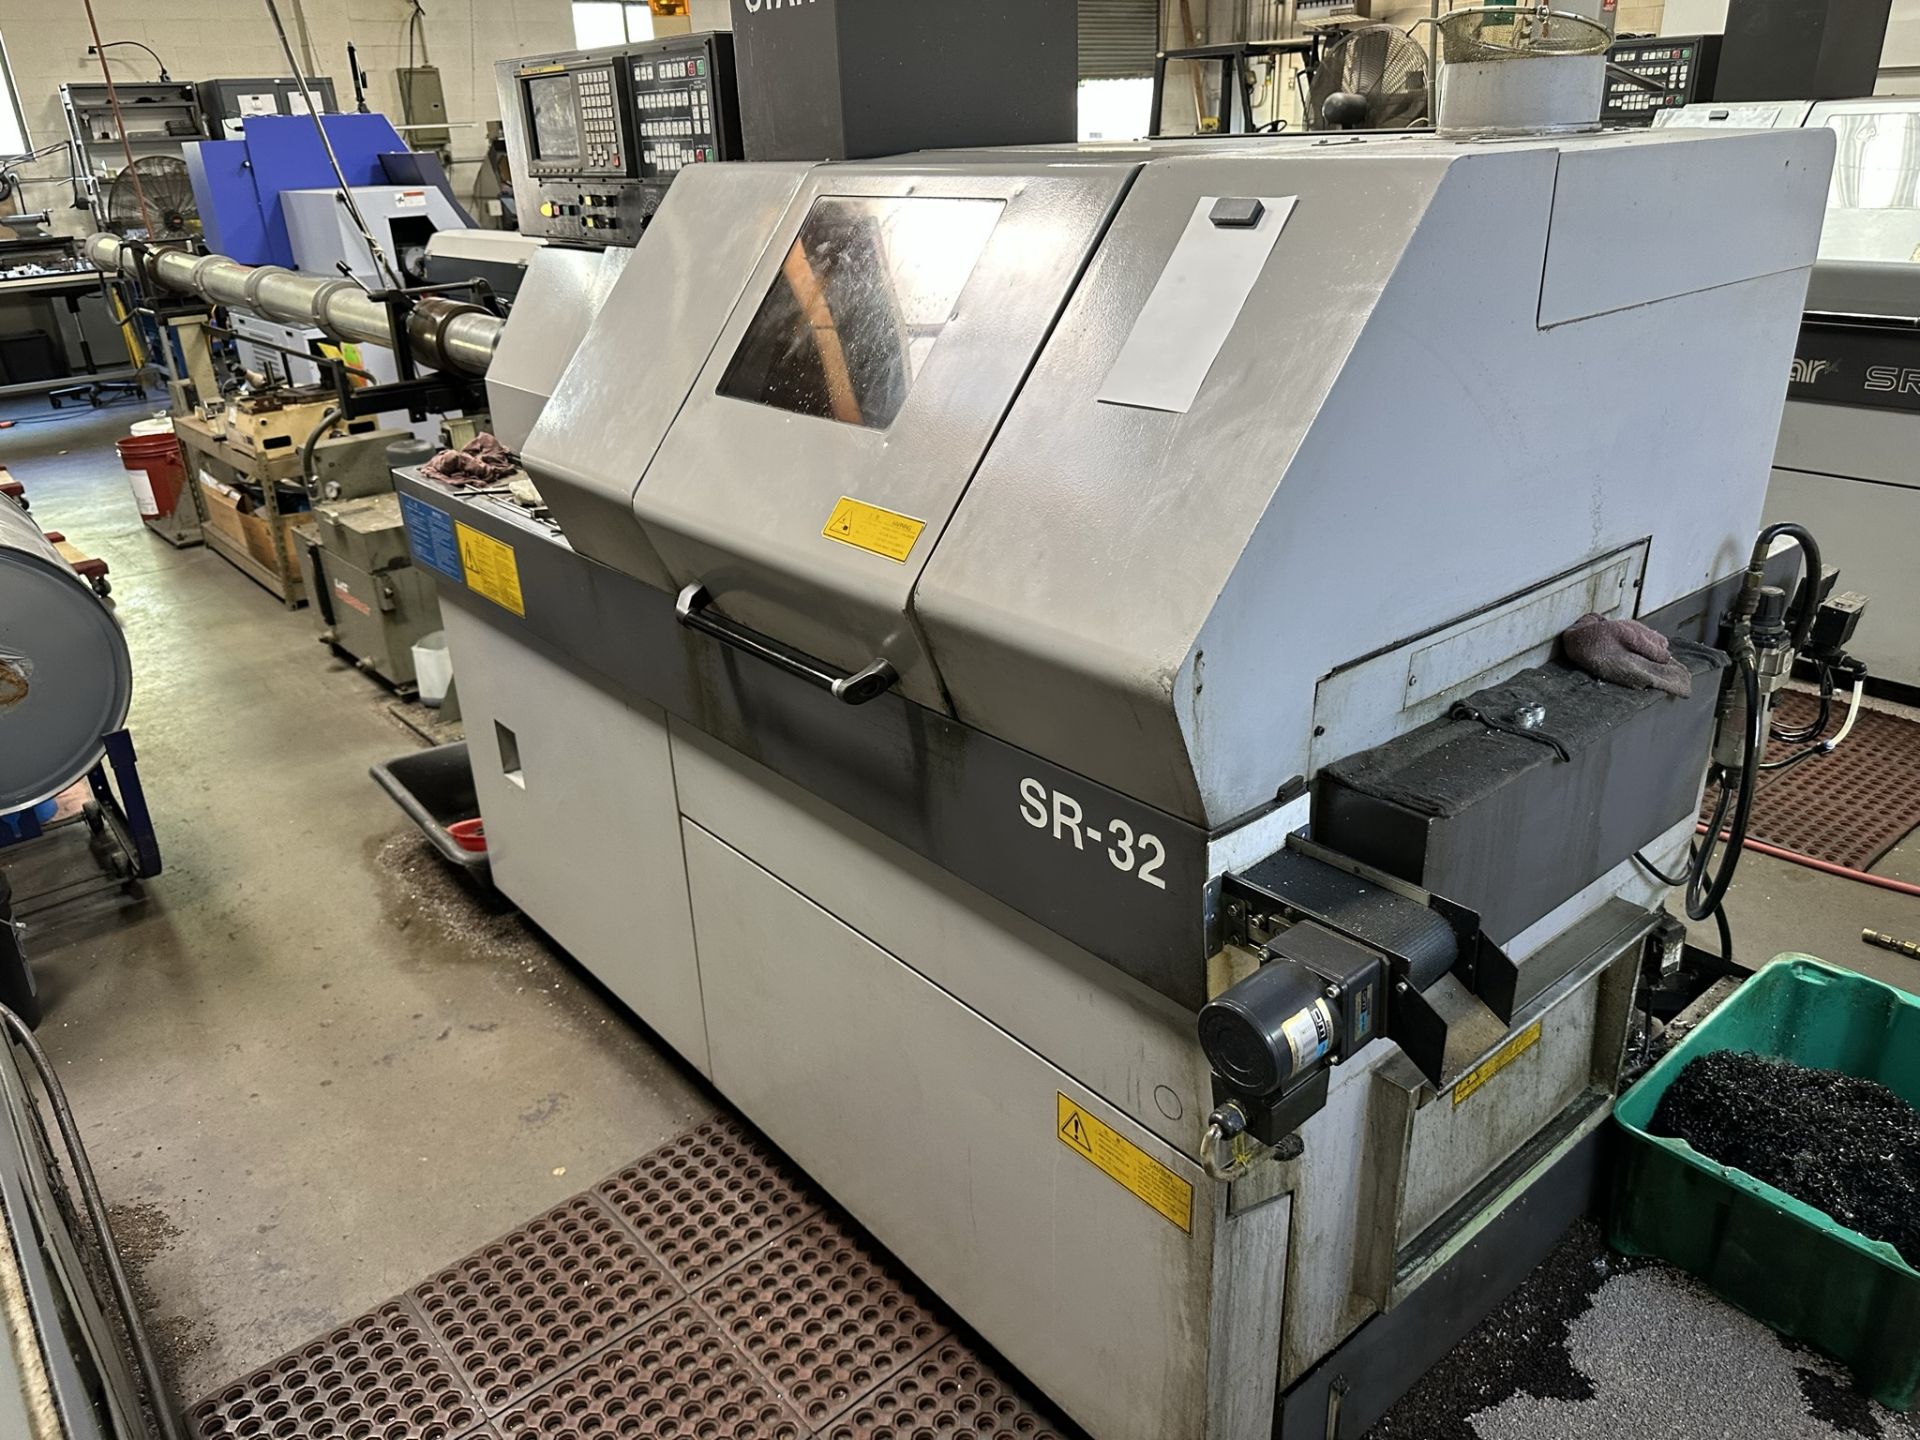 1999 STAR SR-32 SWISS LATHE, FANUC 16-T CONTROL, 32MM (1-1/4") MAIN/SUB SPINDLE, FULL C-AXIS, 7,000 - Image 3 of 23